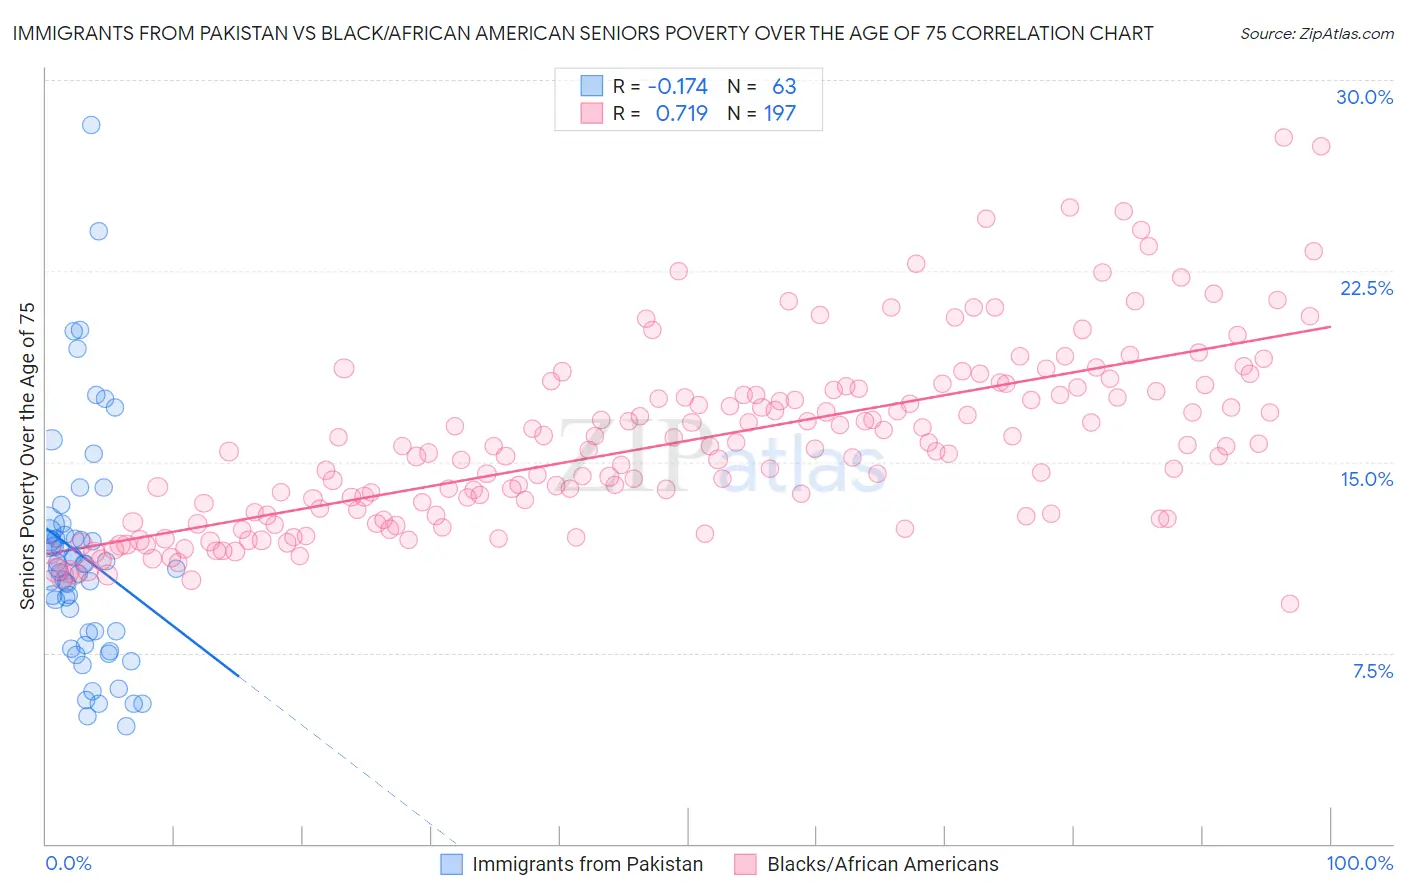 Immigrants from Pakistan vs Black/African American Seniors Poverty Over the Age of 75